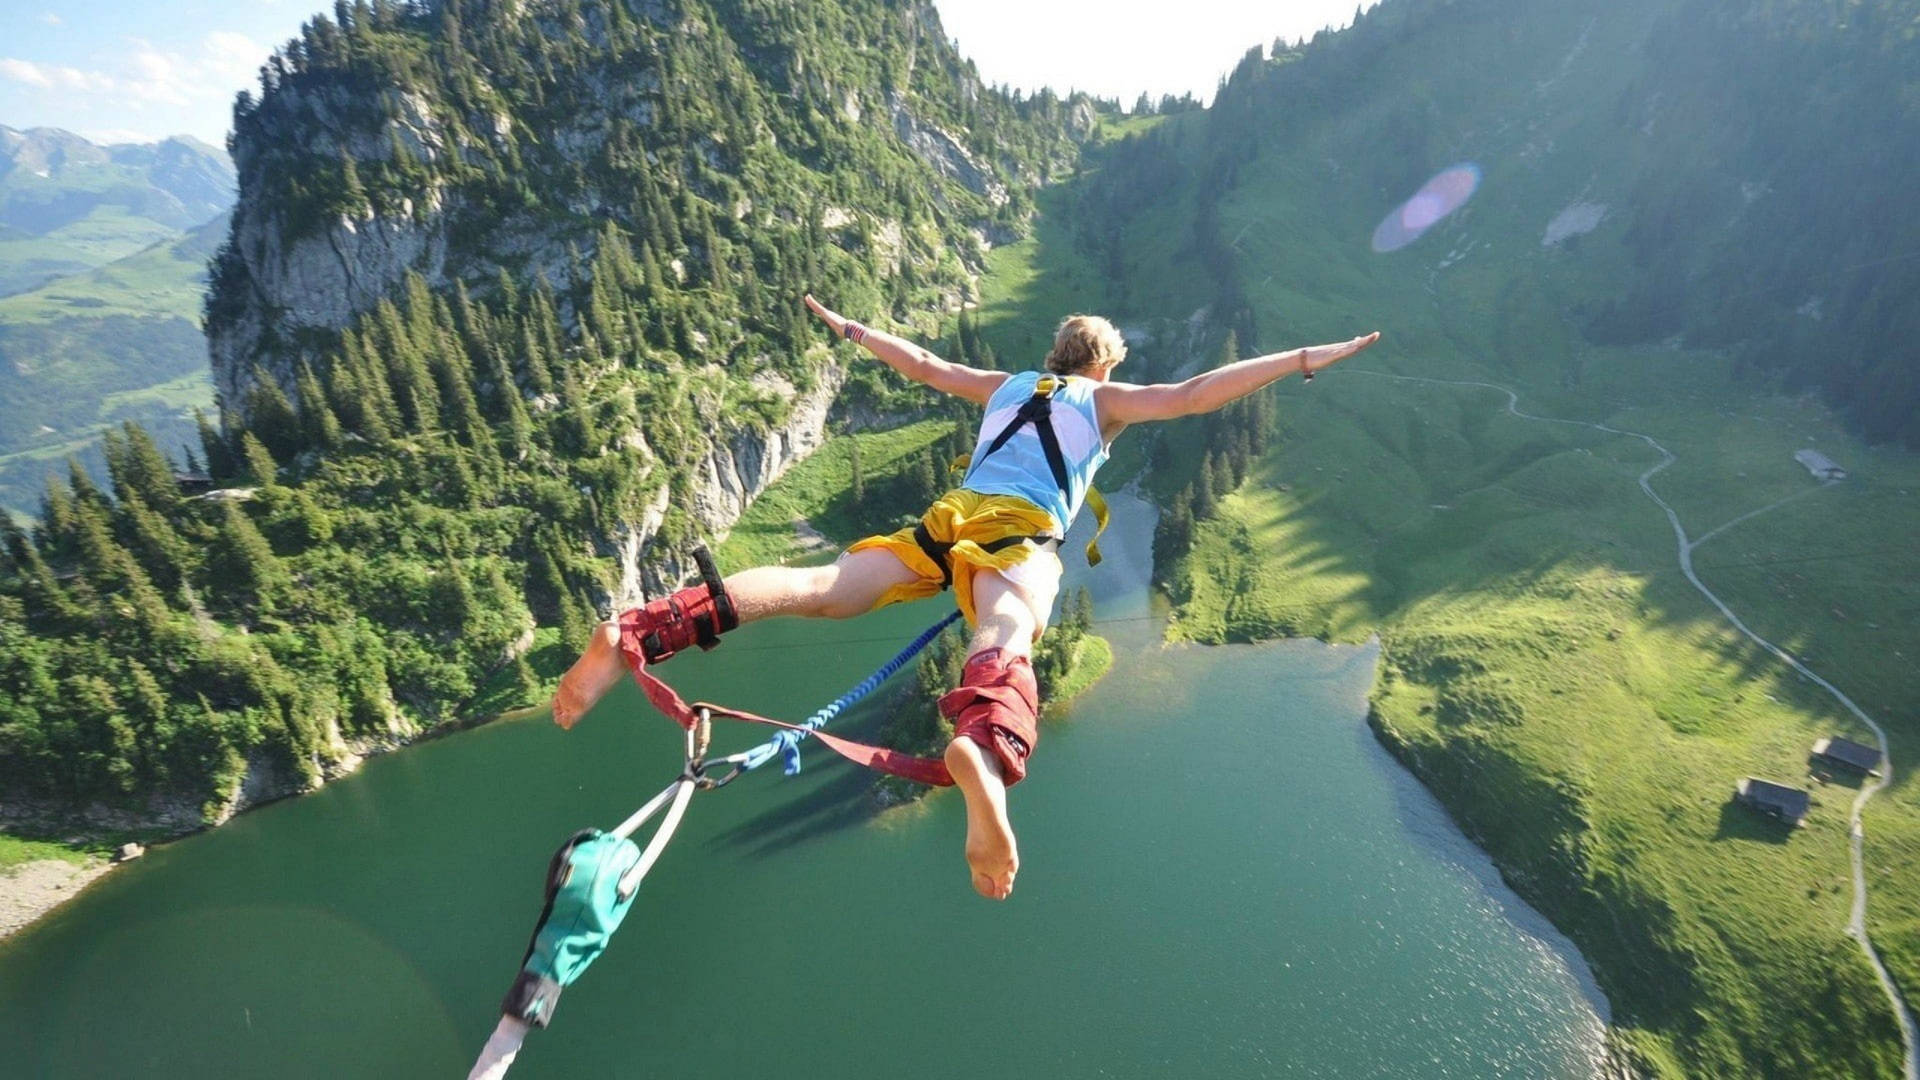 Extreme Sports Bungee Jumping Wallpaper